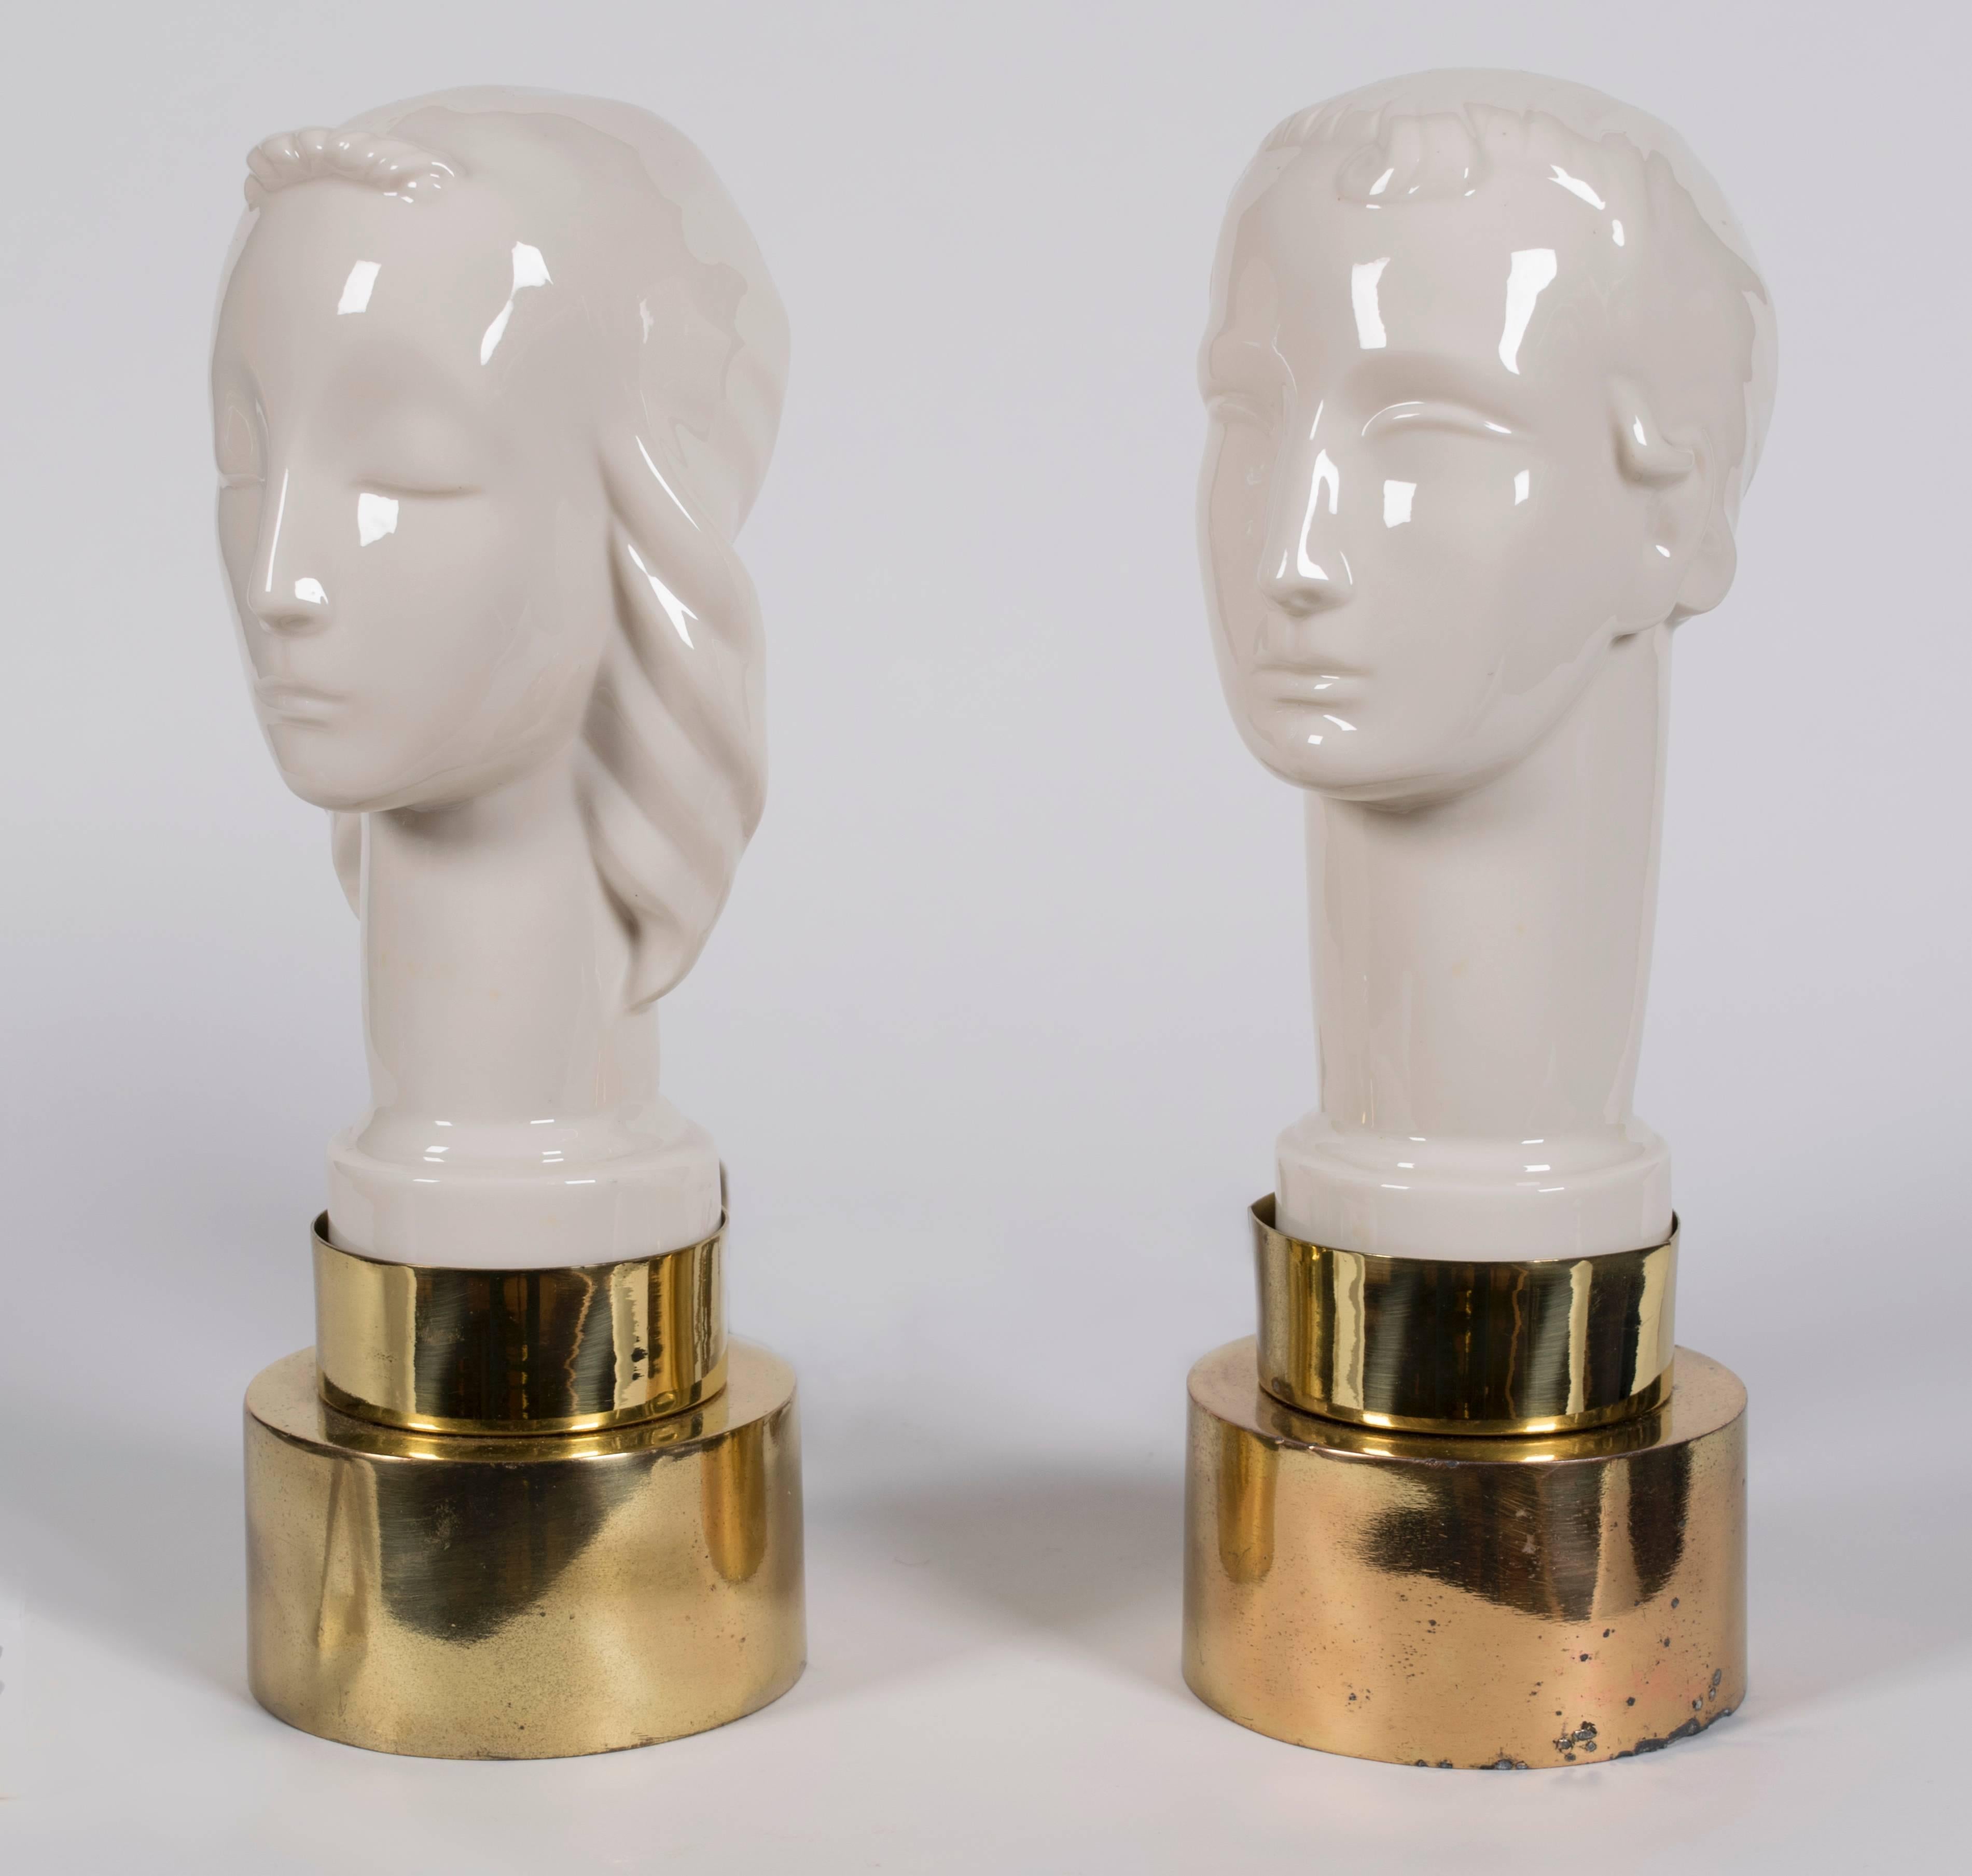 A pair of American Art Deco period glazed ceramic male/female bust lamps manufactured by Lenox under the direction of Frank Graham Holmes, circa 1930.
The Lenox company was founded in New Jersey in 1889. Frank Graham Holmes was the company's chief